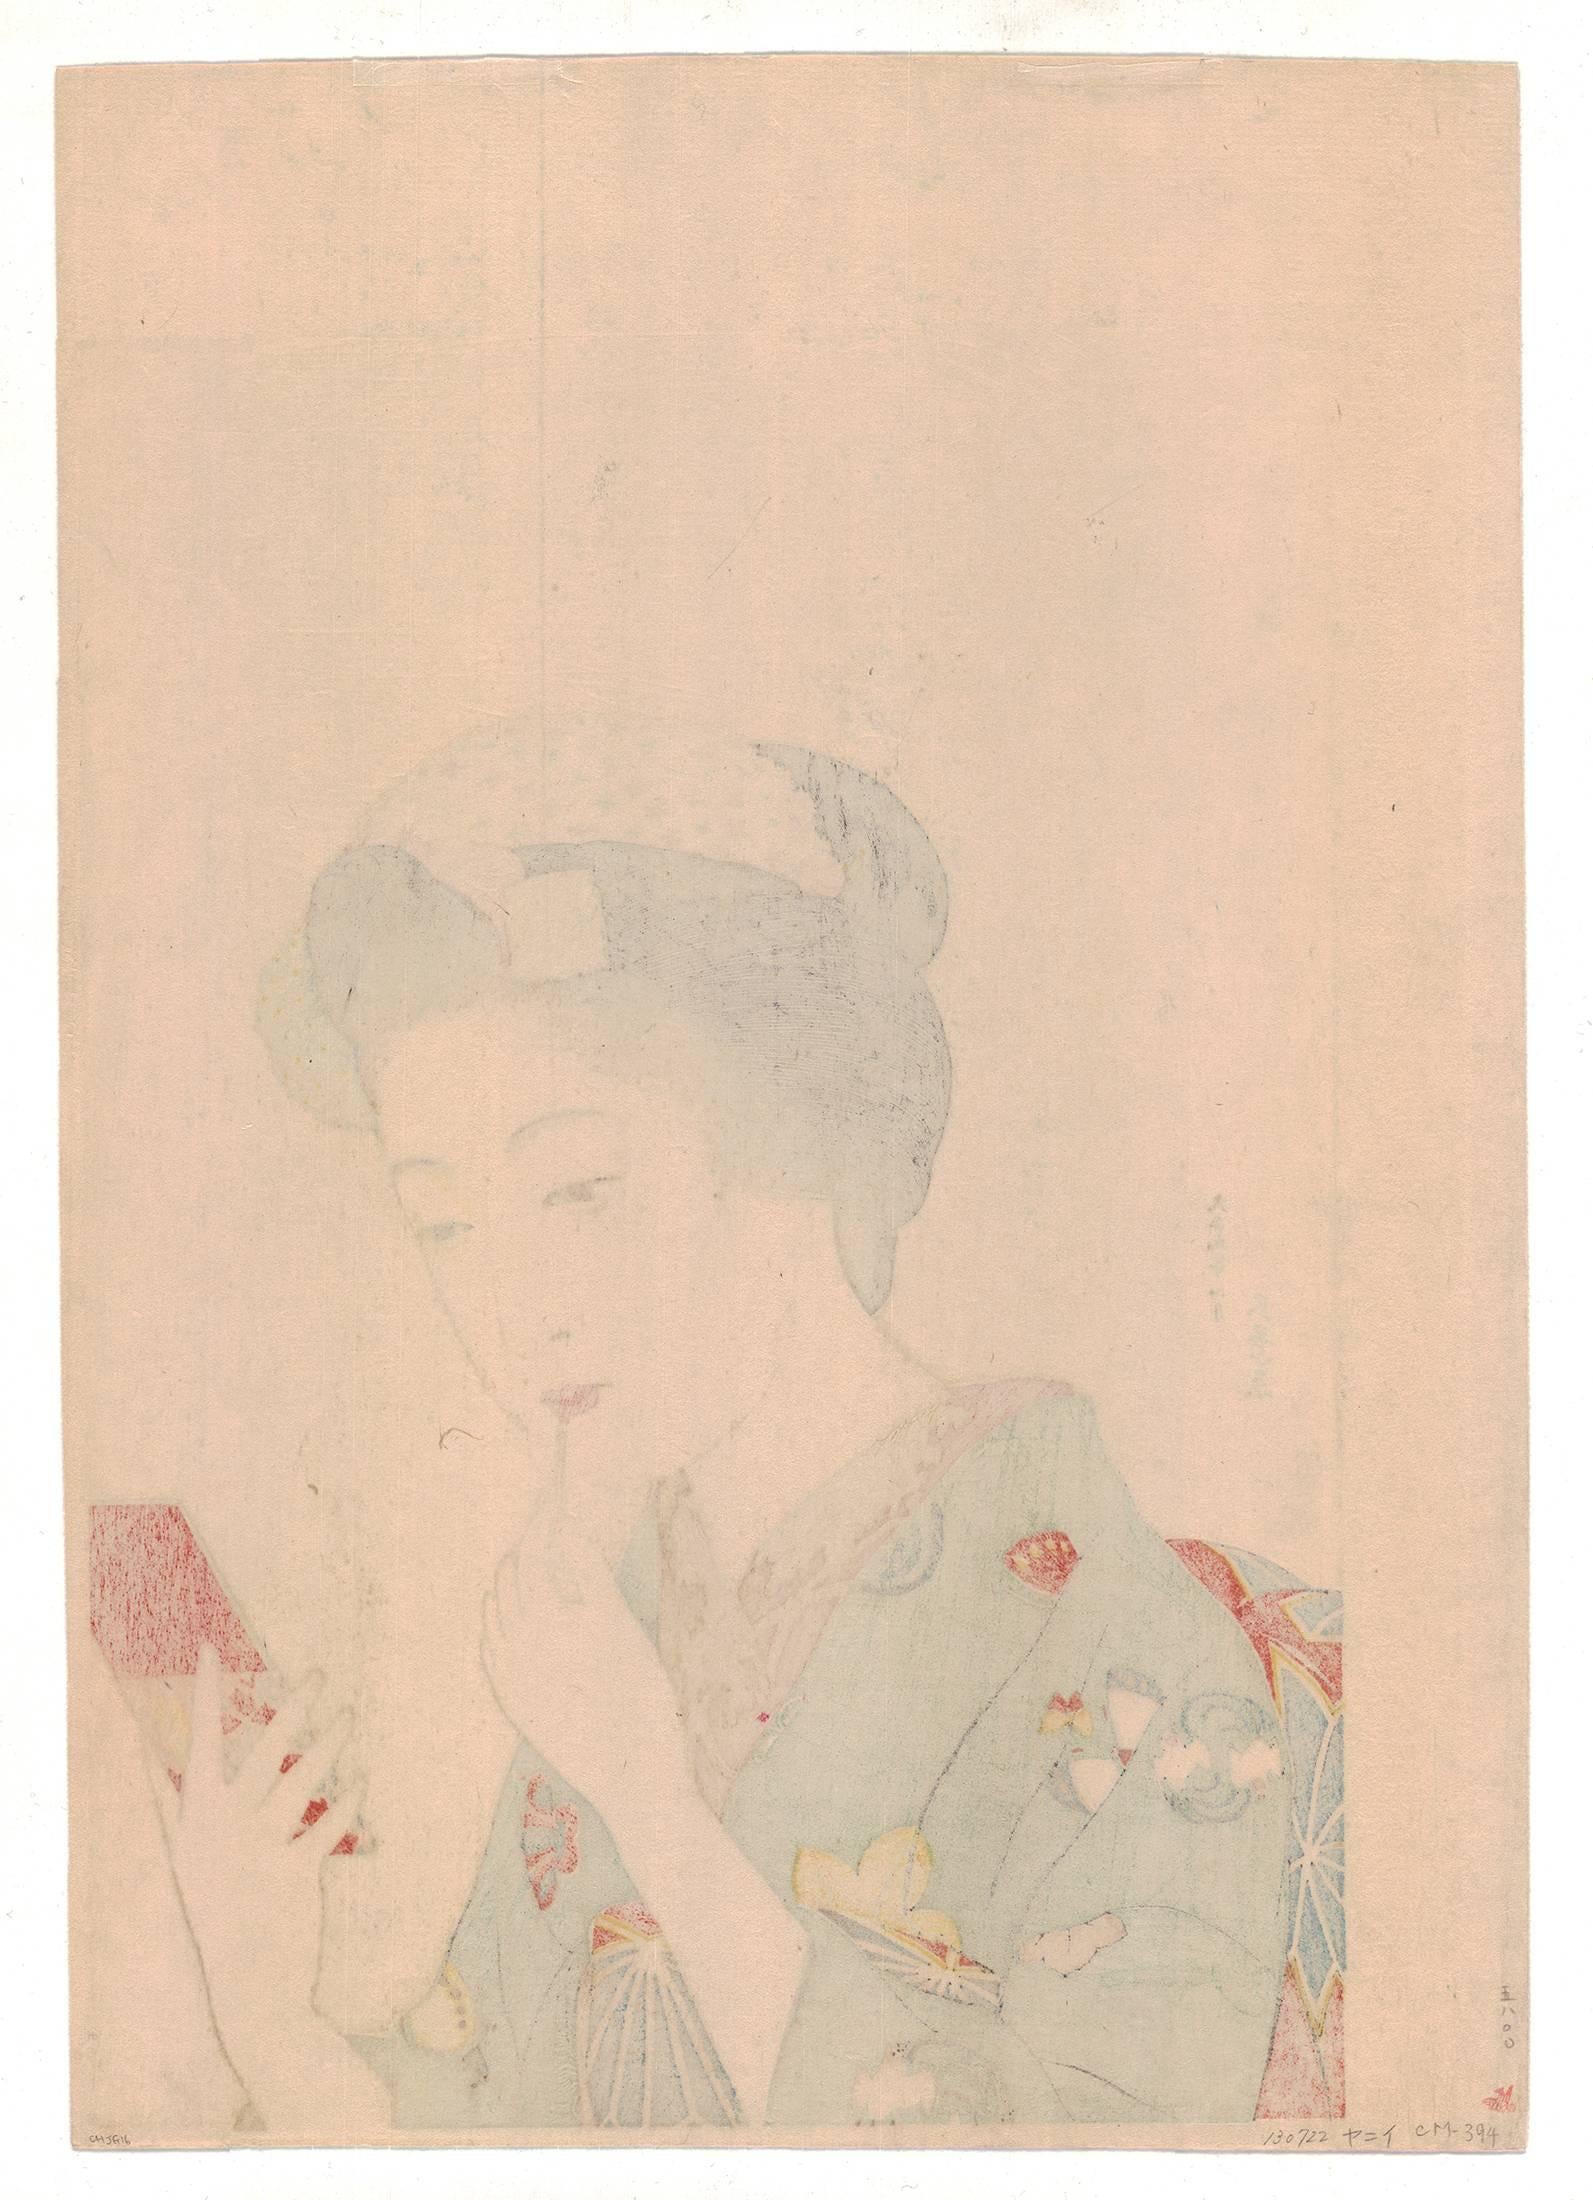 Artist: Goyo Hashiguchi (1880-1921)
Title: Maiko in Kyoto
Published: Posthumously printed by the Hashiguchi family circa 1950-1952, signed Goyo ga with circular artist's seal Goyo

Goyo Hashiguchi, a painter and printmaker, was one of the key